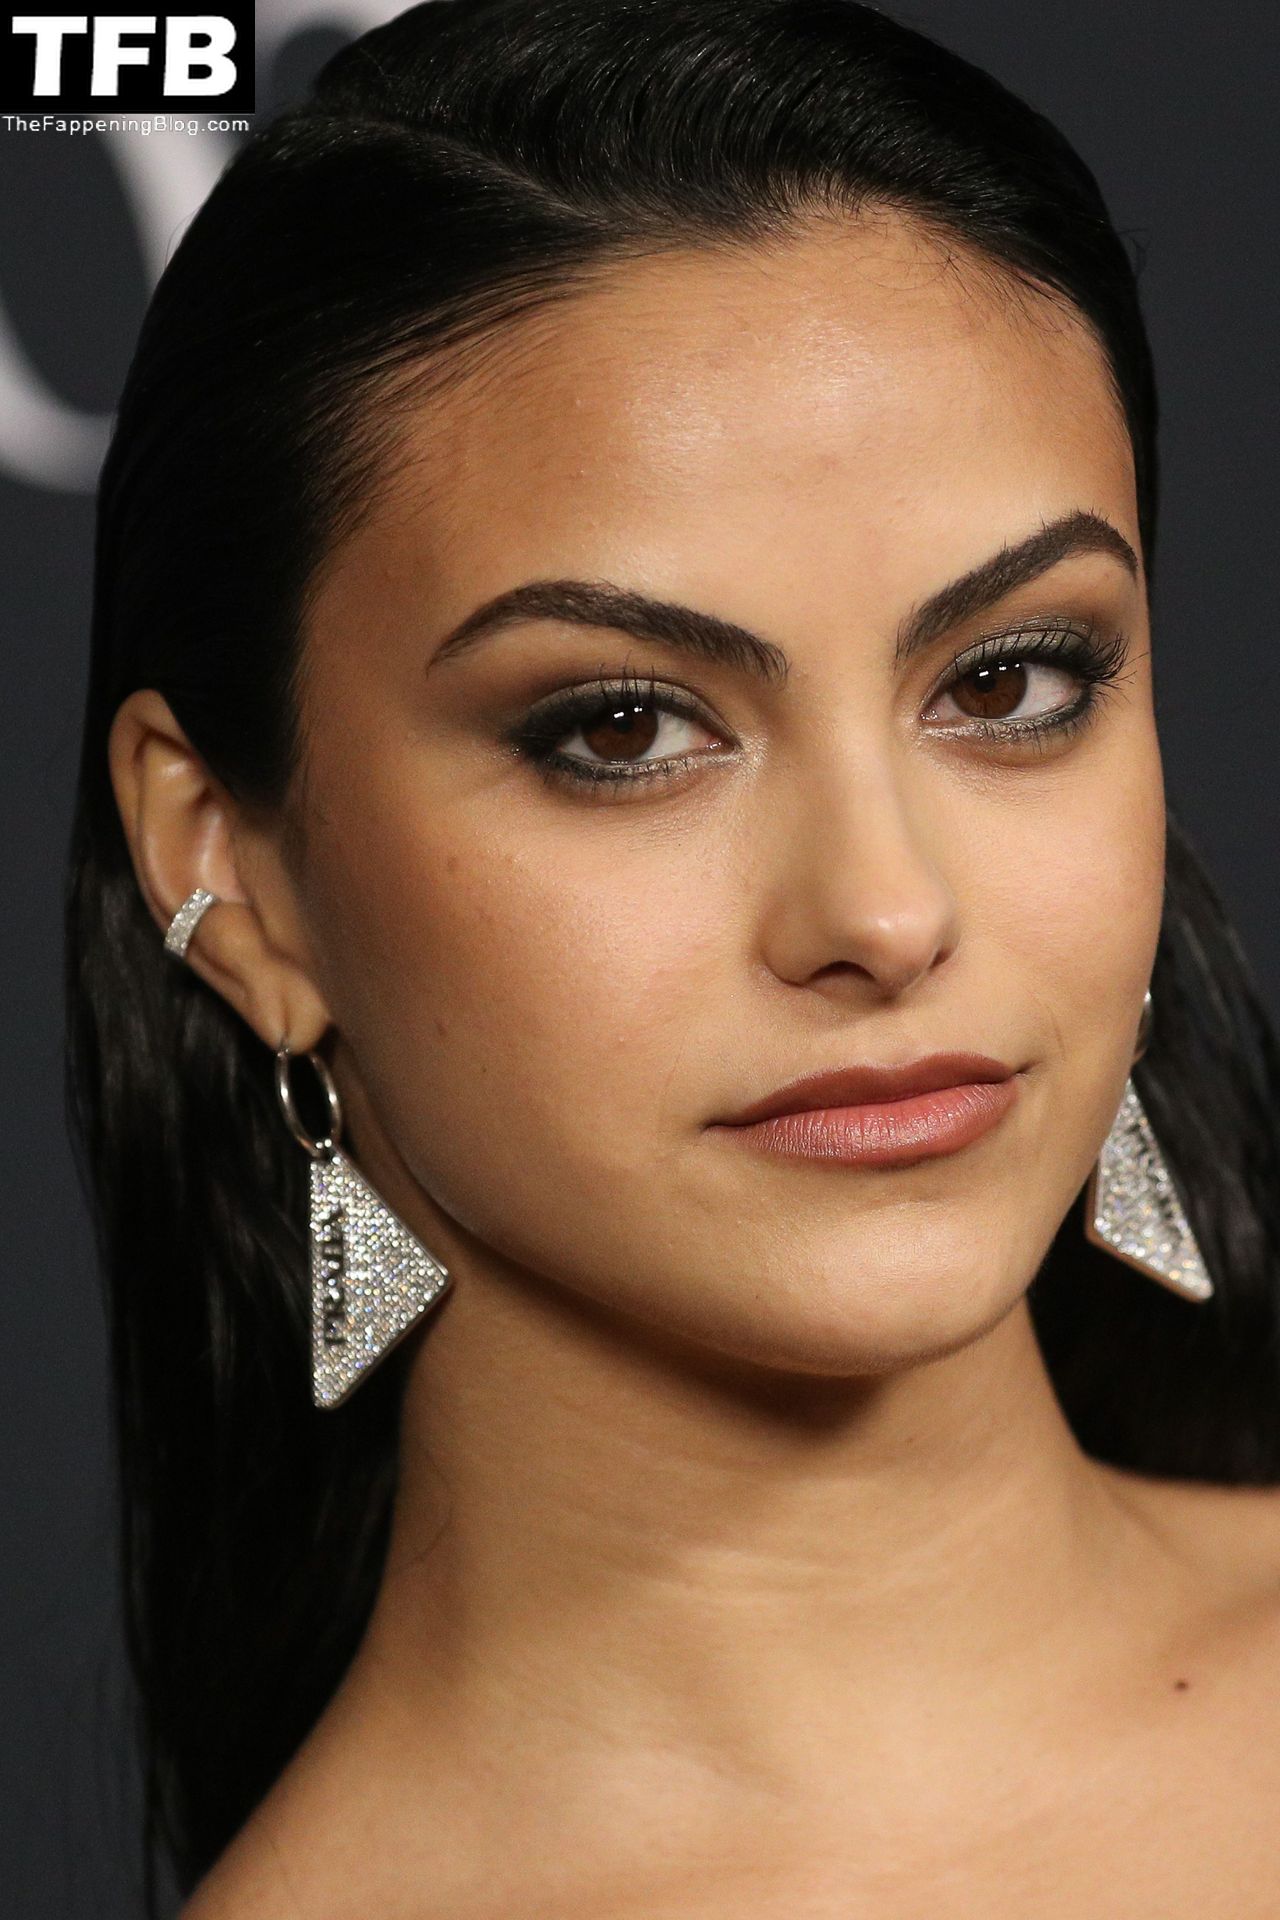 Camila-Mendes-See-Through-Tits-The-Fappening-Blog-86.jpg